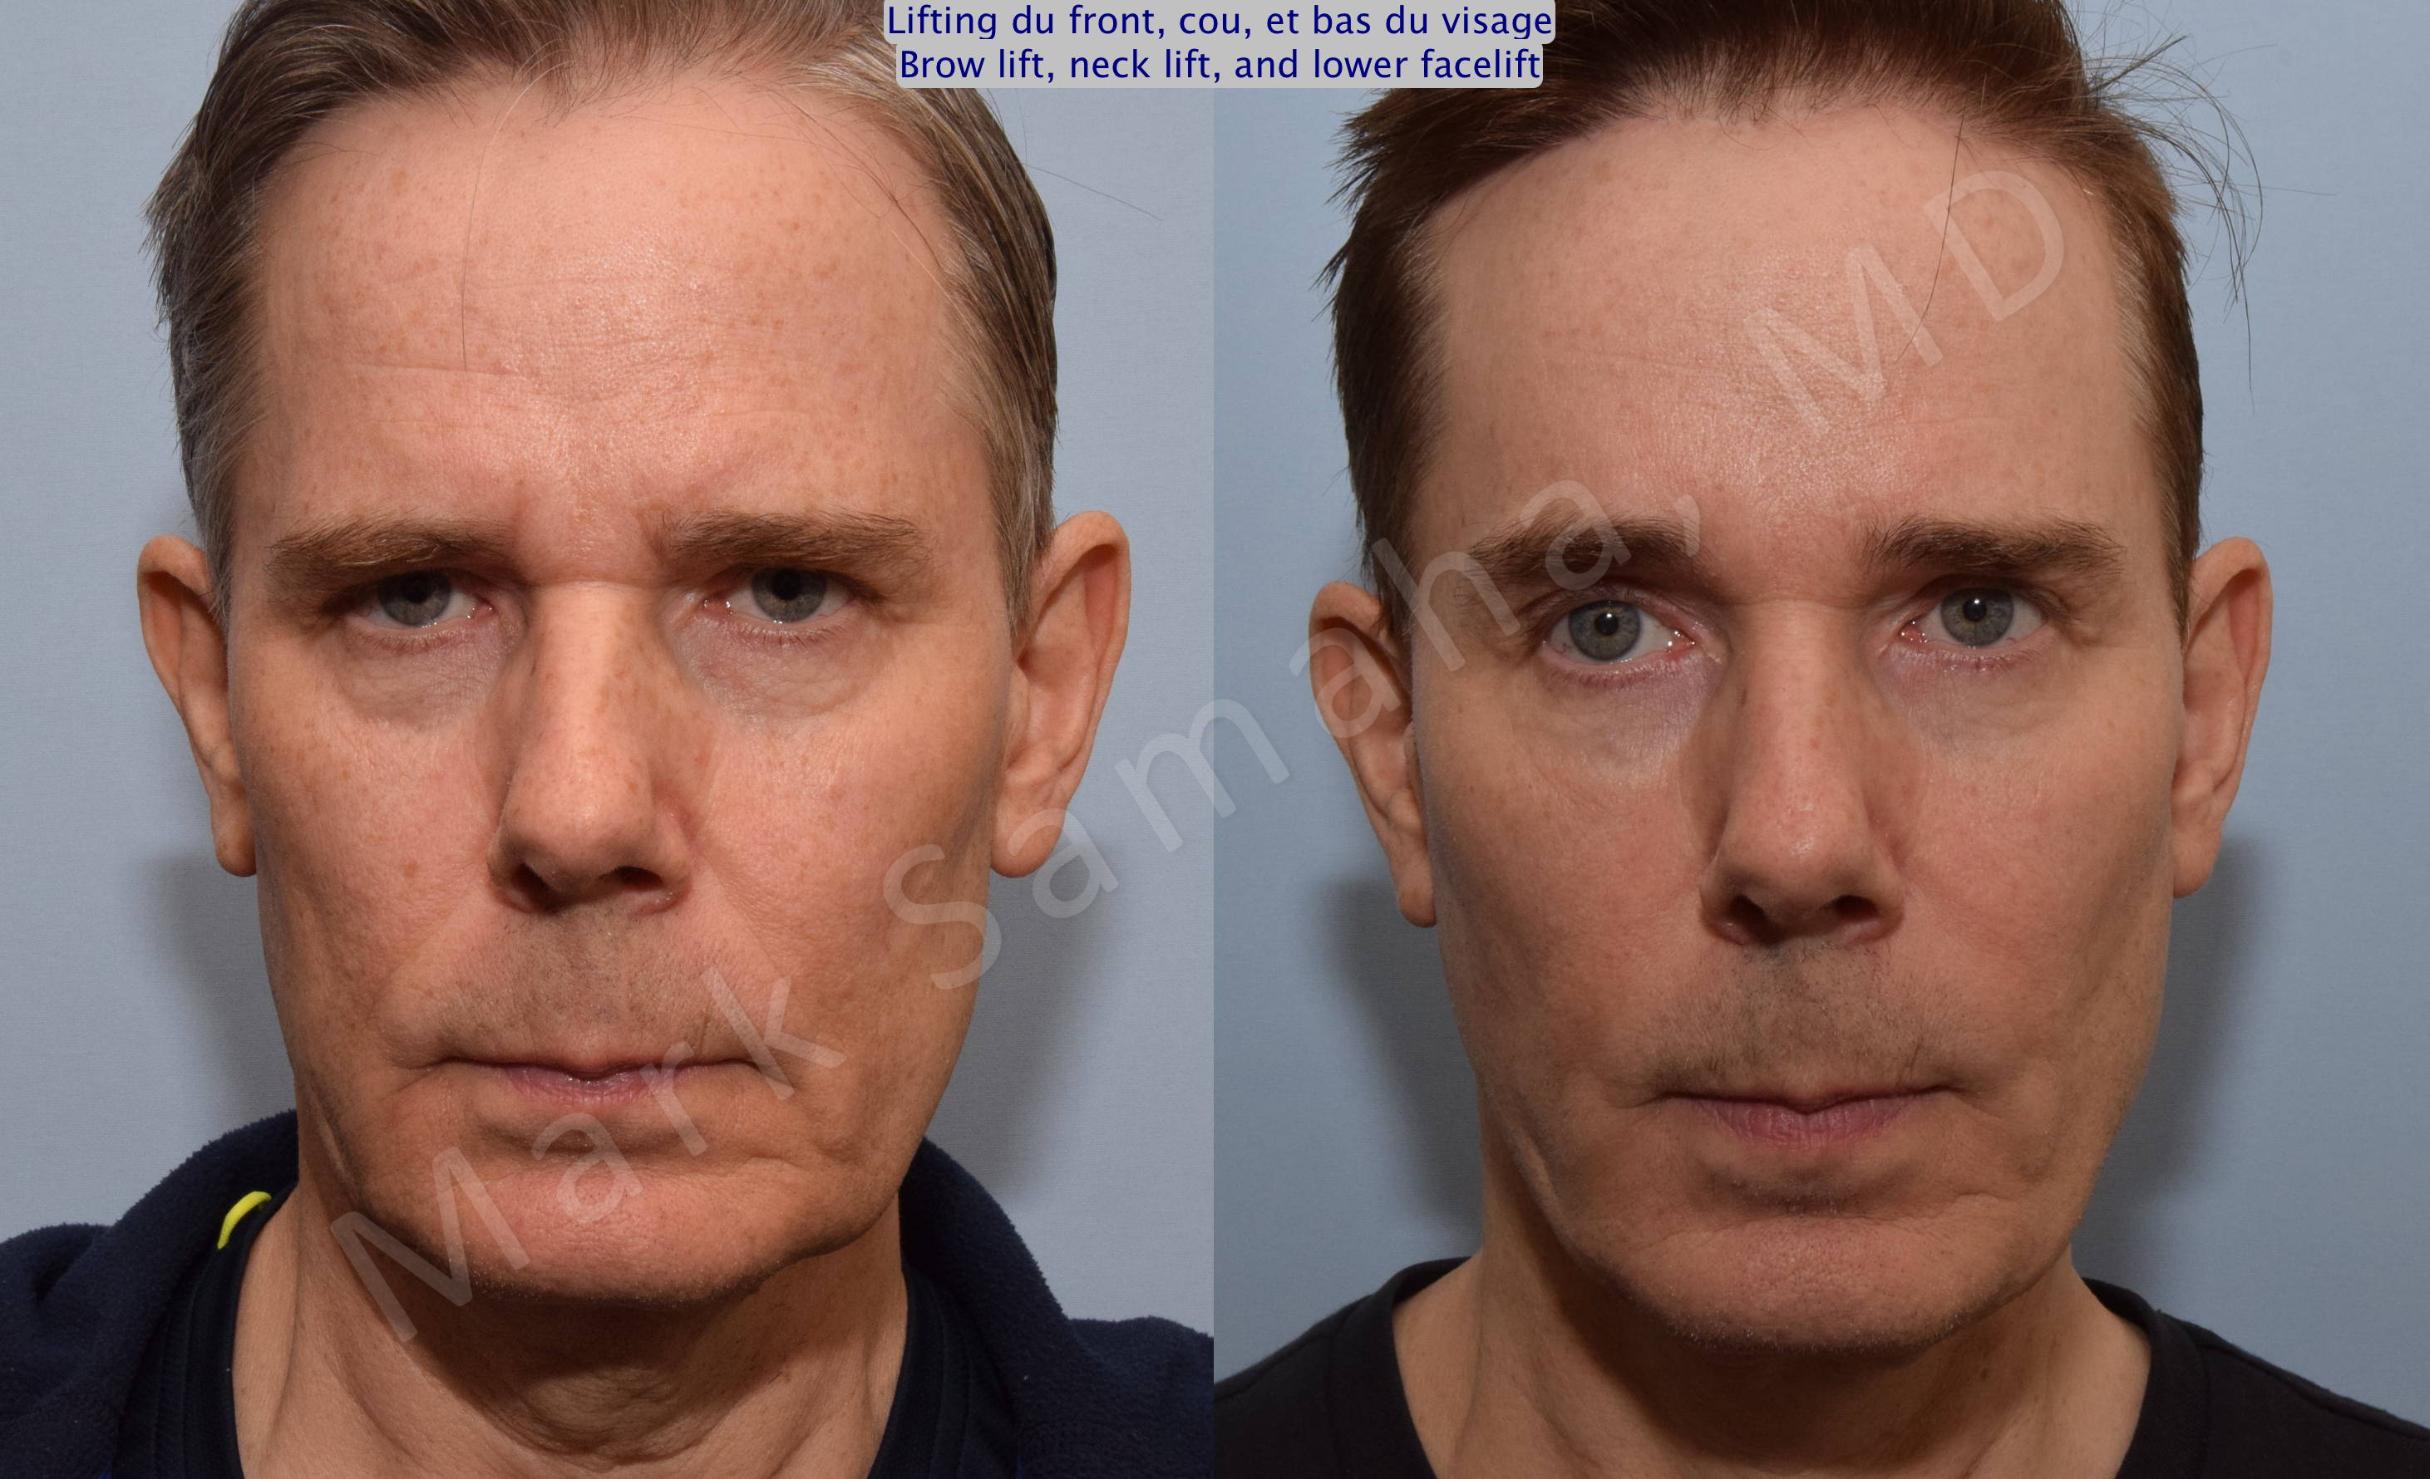 Case 91 – Brow lift, neck lift, and lower facelift